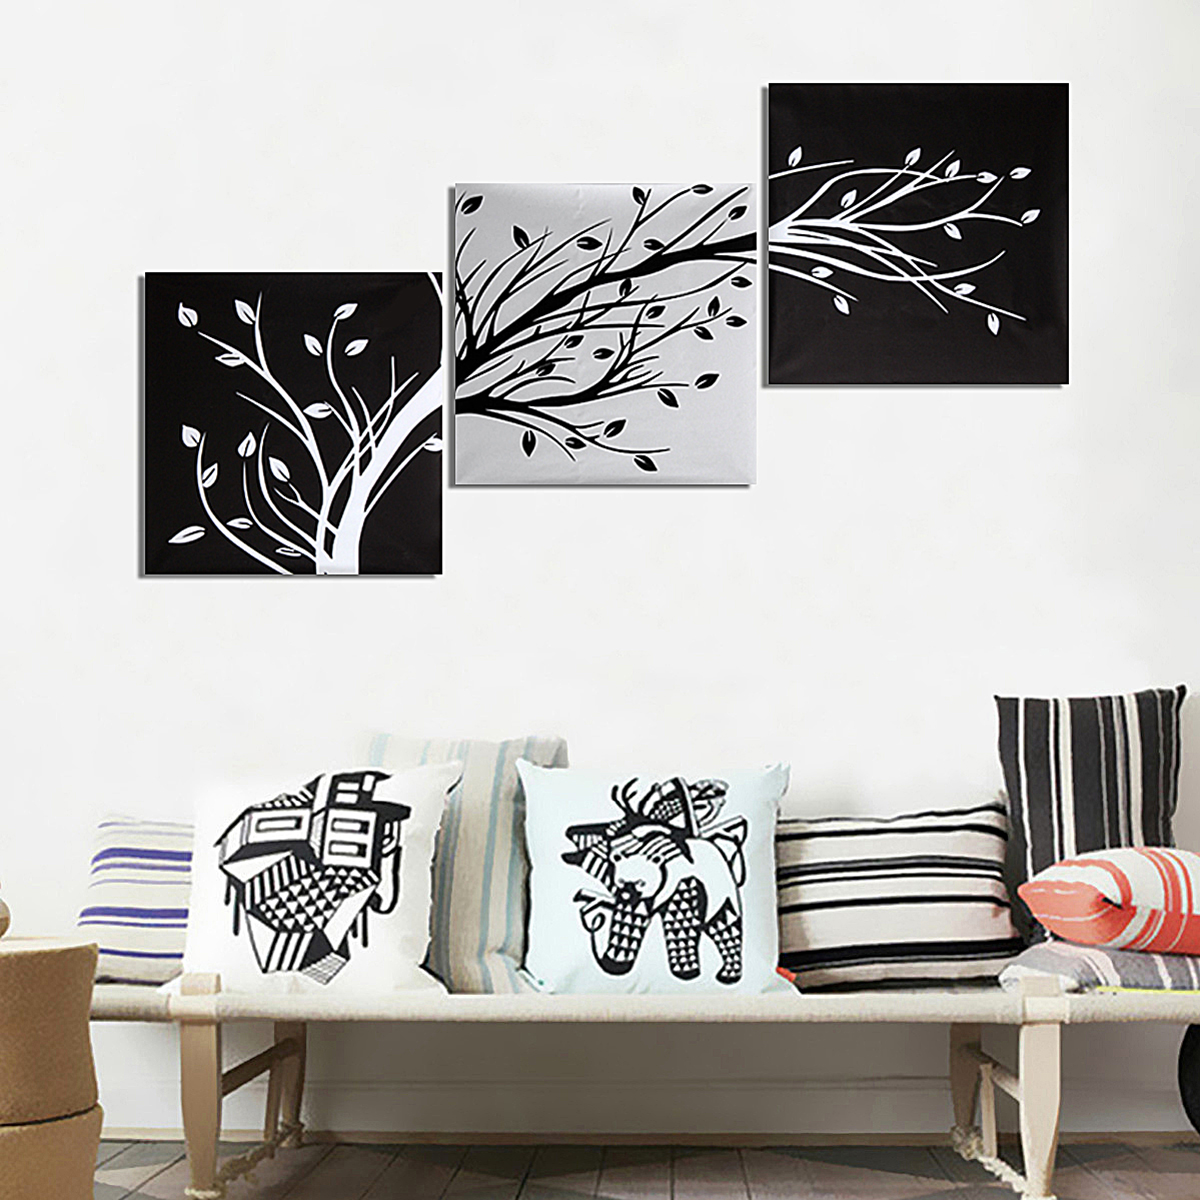 3Pcs-Wall-Decorative-Paintings-Abstract-Wood-Canvas-Print-Art-Pictures-Frameless-Wall-Hanging-Decor--1206624-3